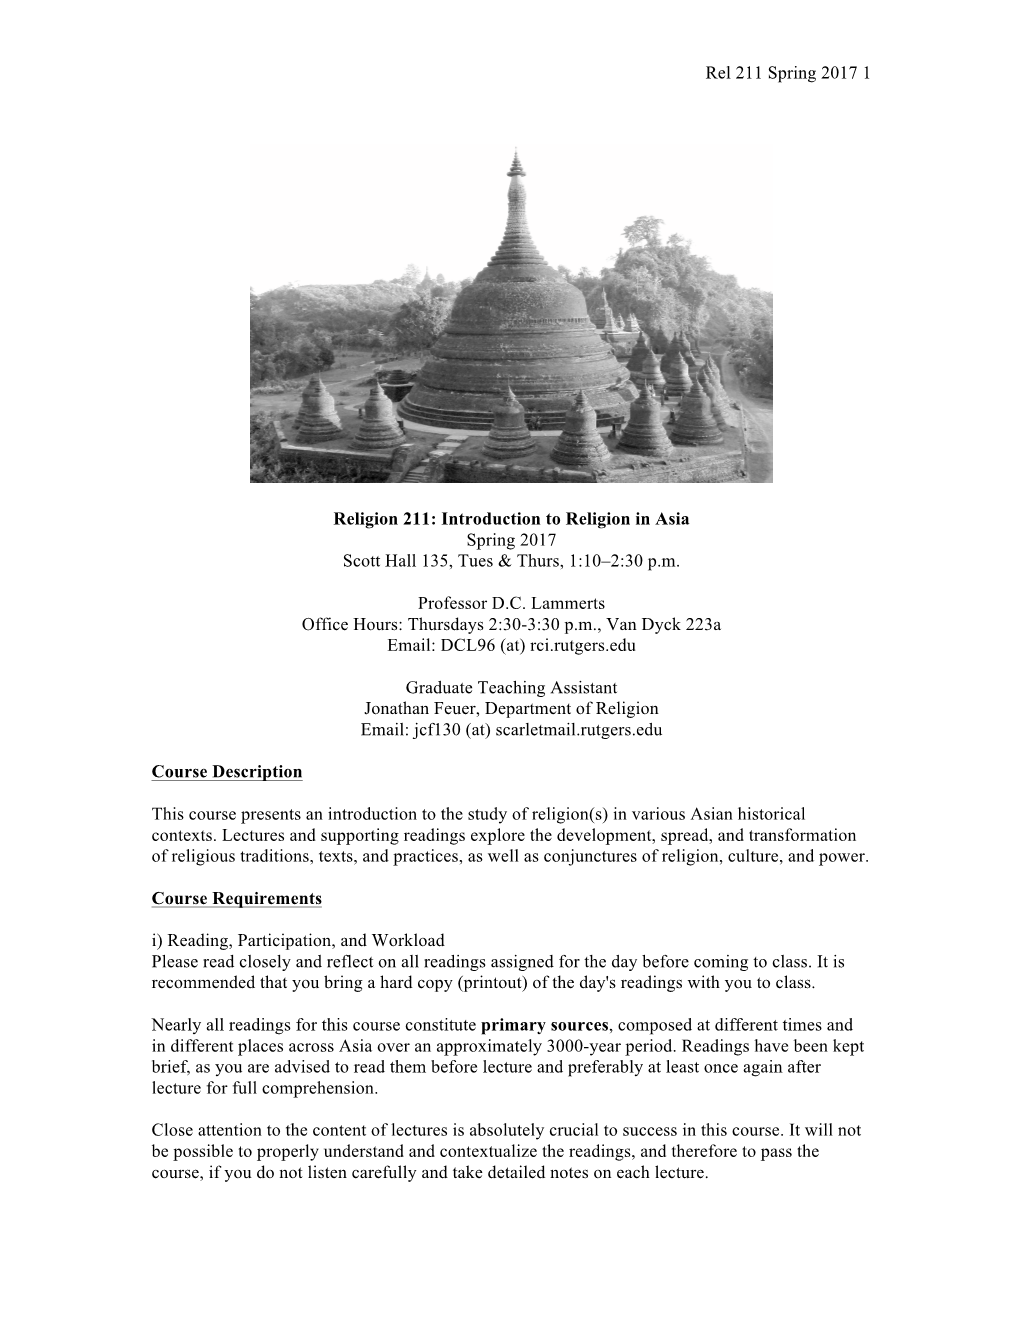 Introduction to Religion in Asia Spring 2017 Scott Hall 135, Tues & Thurs, 1:10–2:30 P